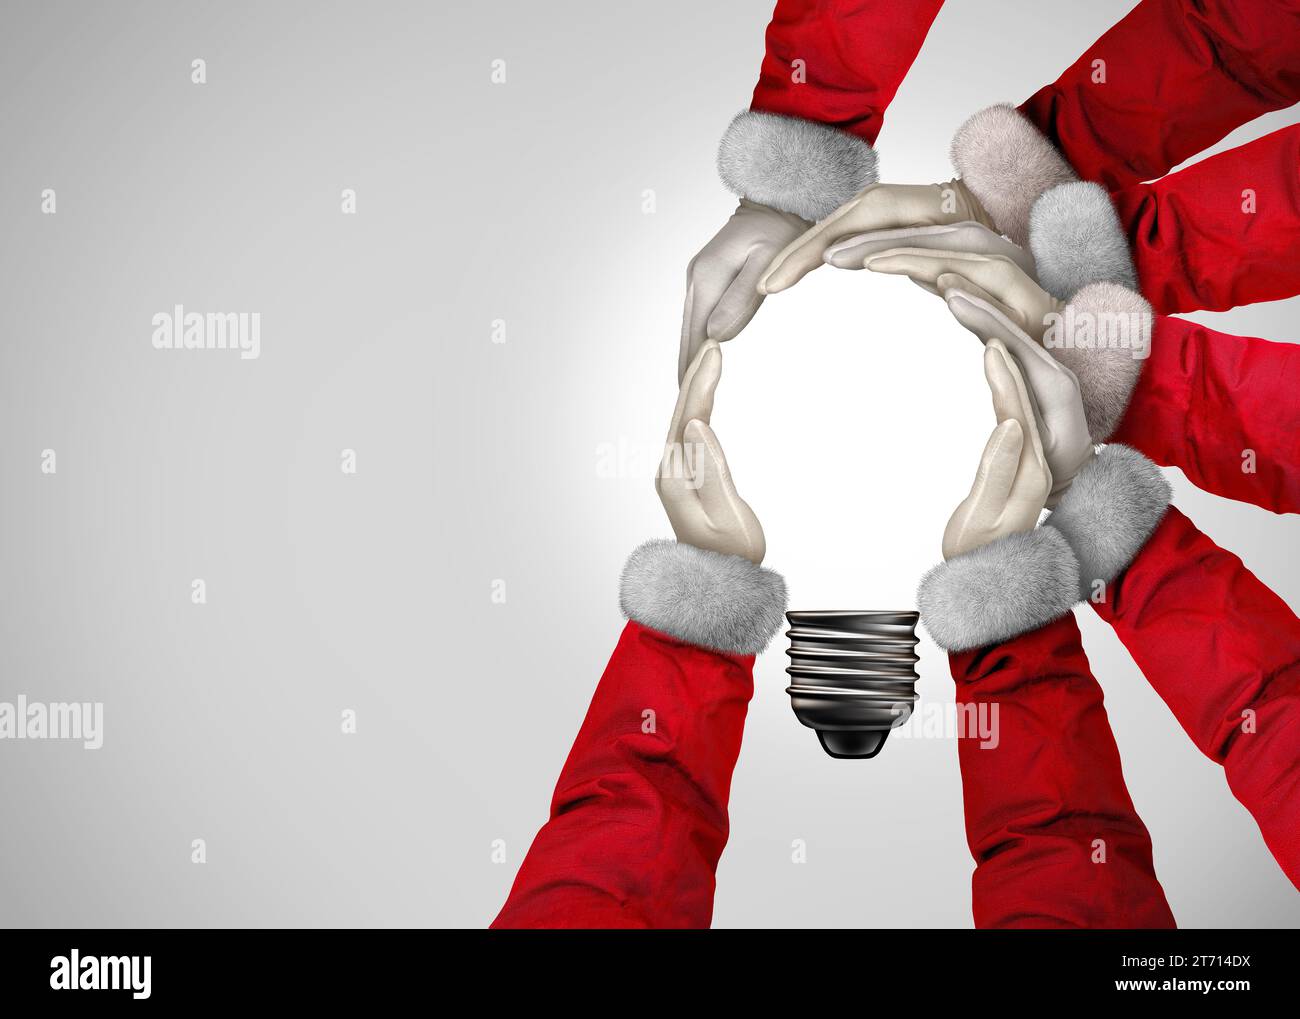 Christmas Ideas as a group of Santa Claus people joining hands together into the shape of an inspirational light bulb as a New Year winter holiday com Stock Photo